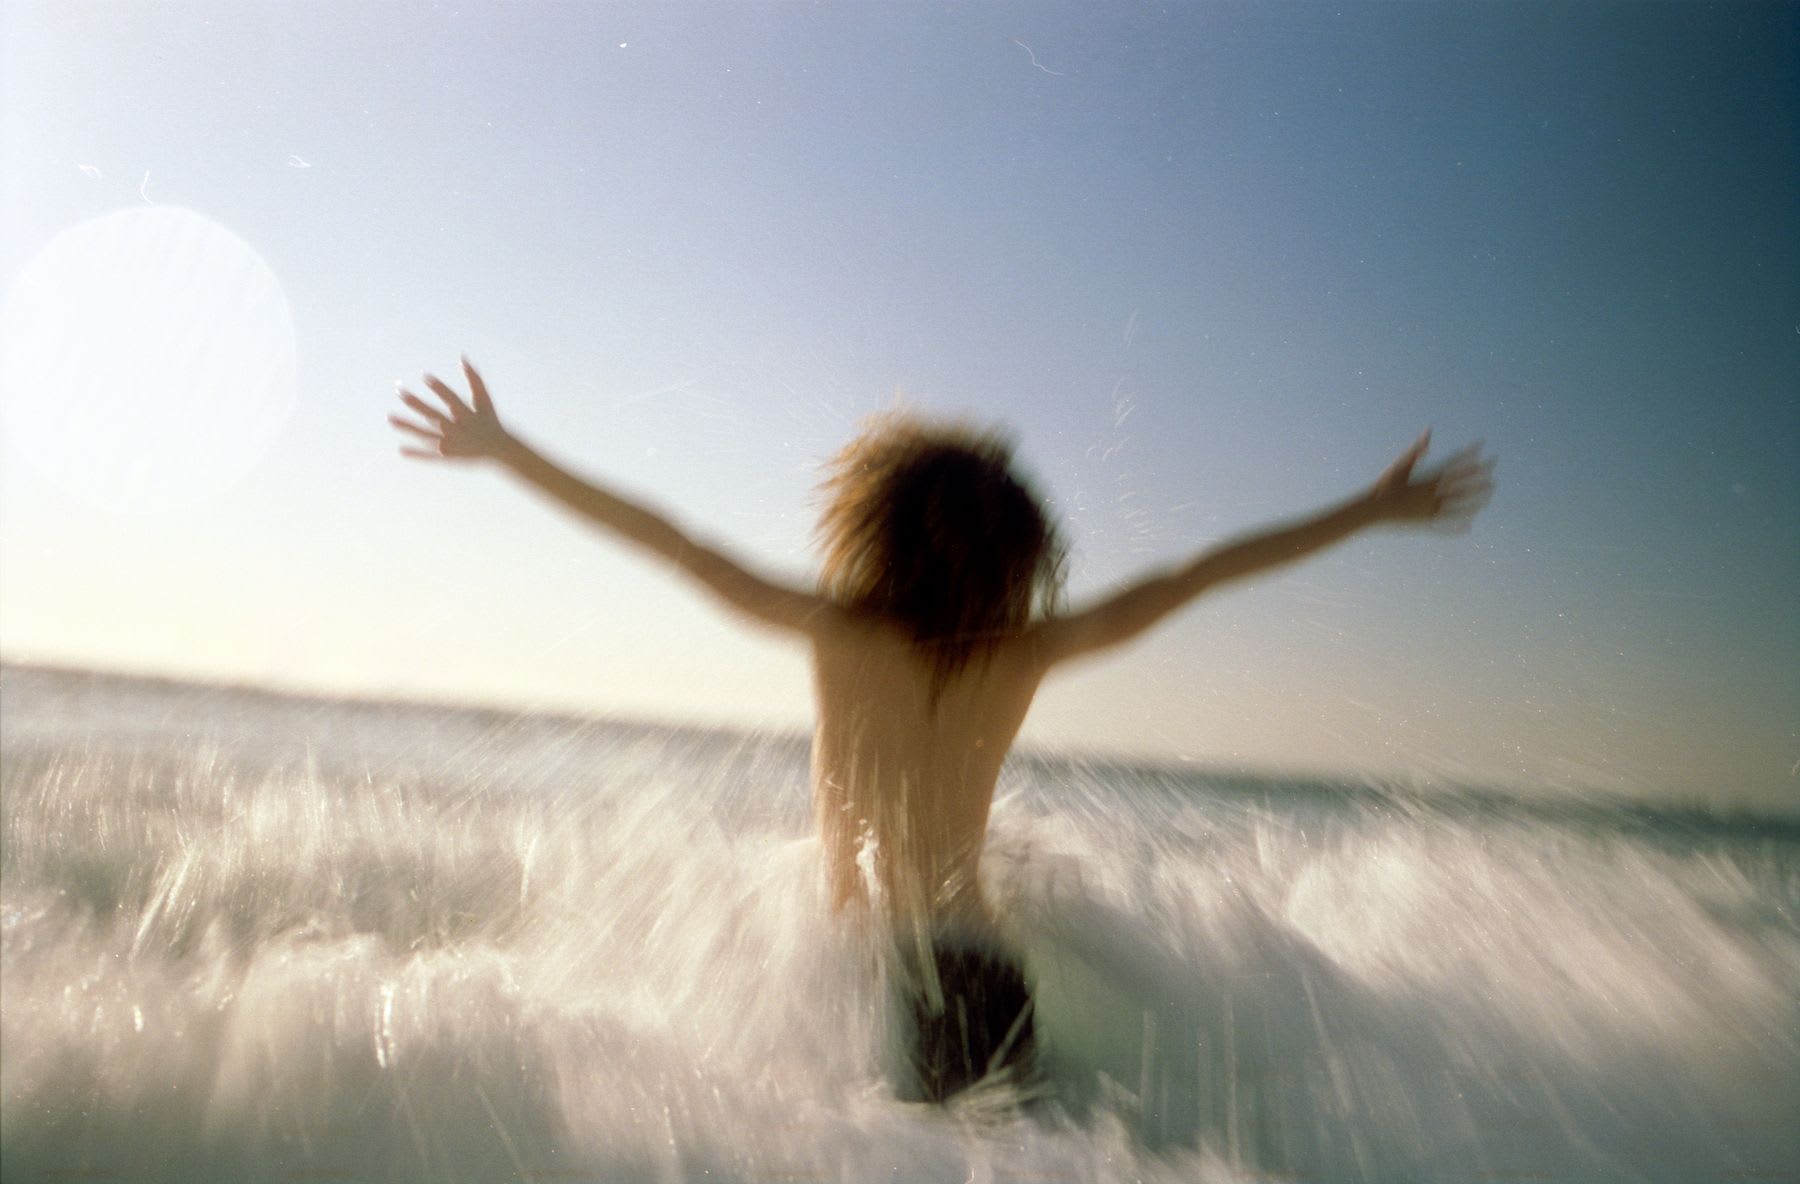 A person with outstretched arms running into the ocean waves.